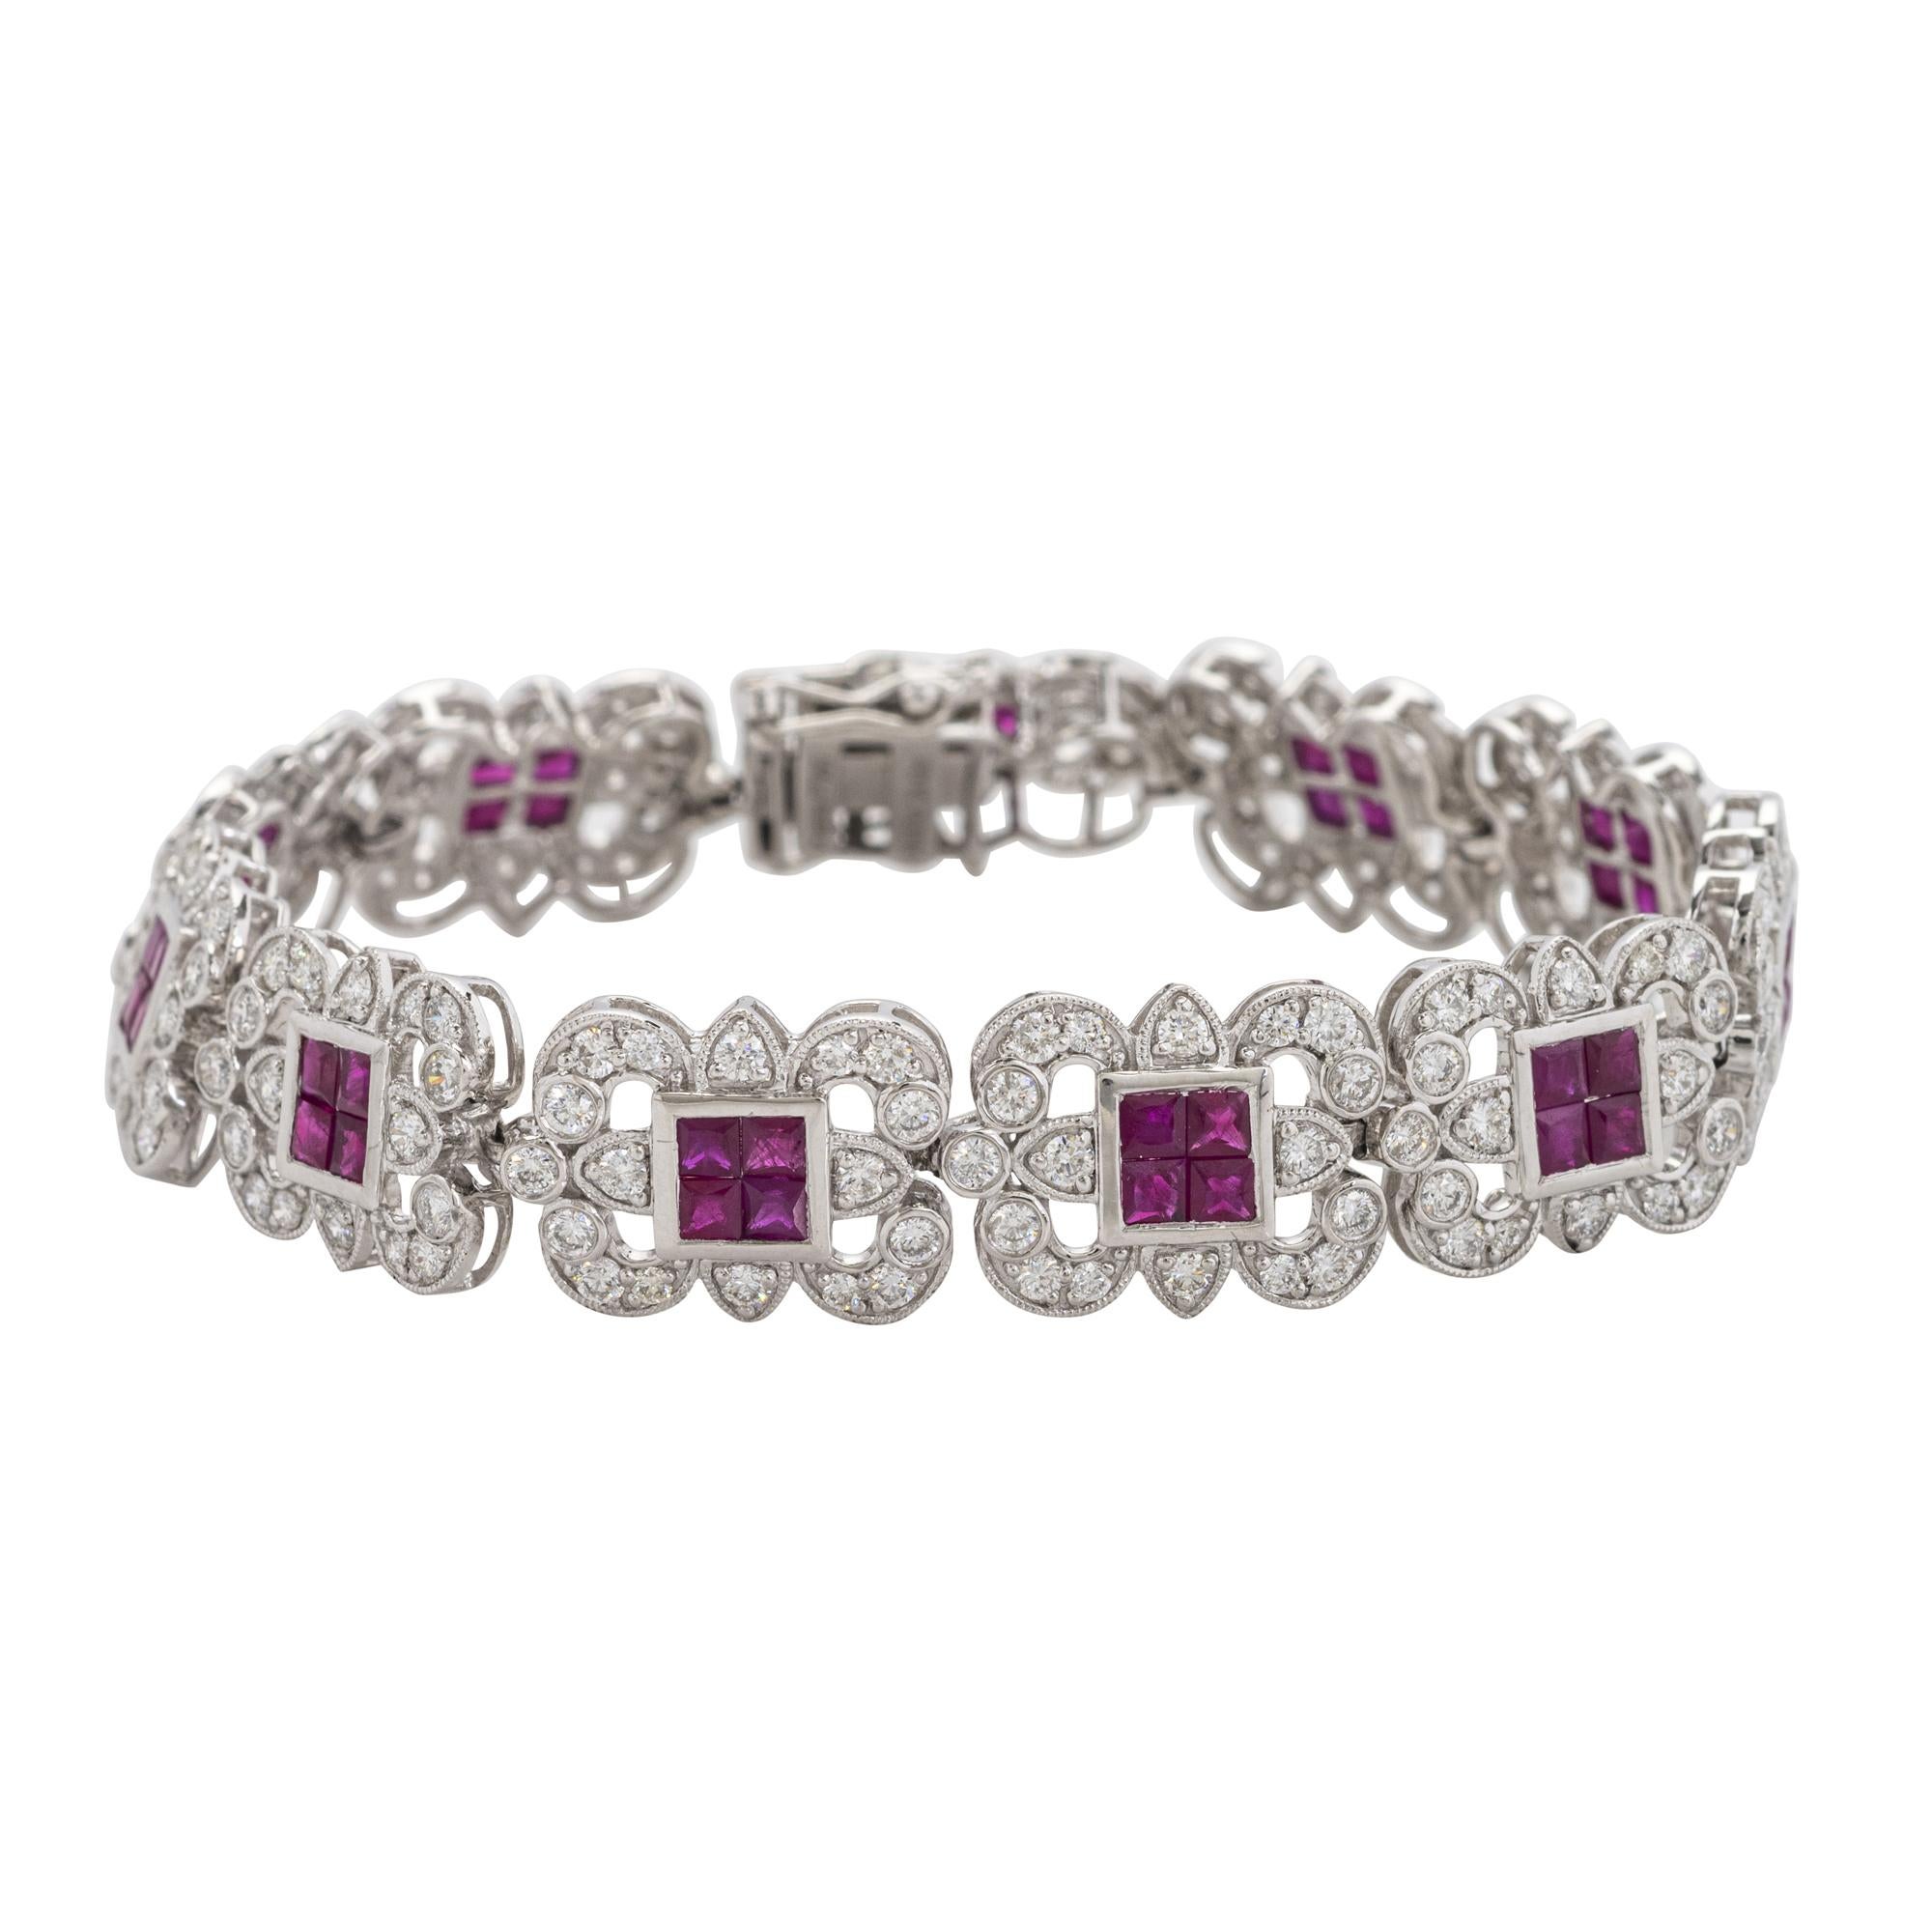 PLATINUM, DIAMOND AND RUBY BRACELET
Of openwork geometric design, each plaque set with four square cut rubies and framed by diamonds,
Forty-four bezel set square cut rubies with a total weight of 5.57 carats, diamonds weighing a total of 4.42